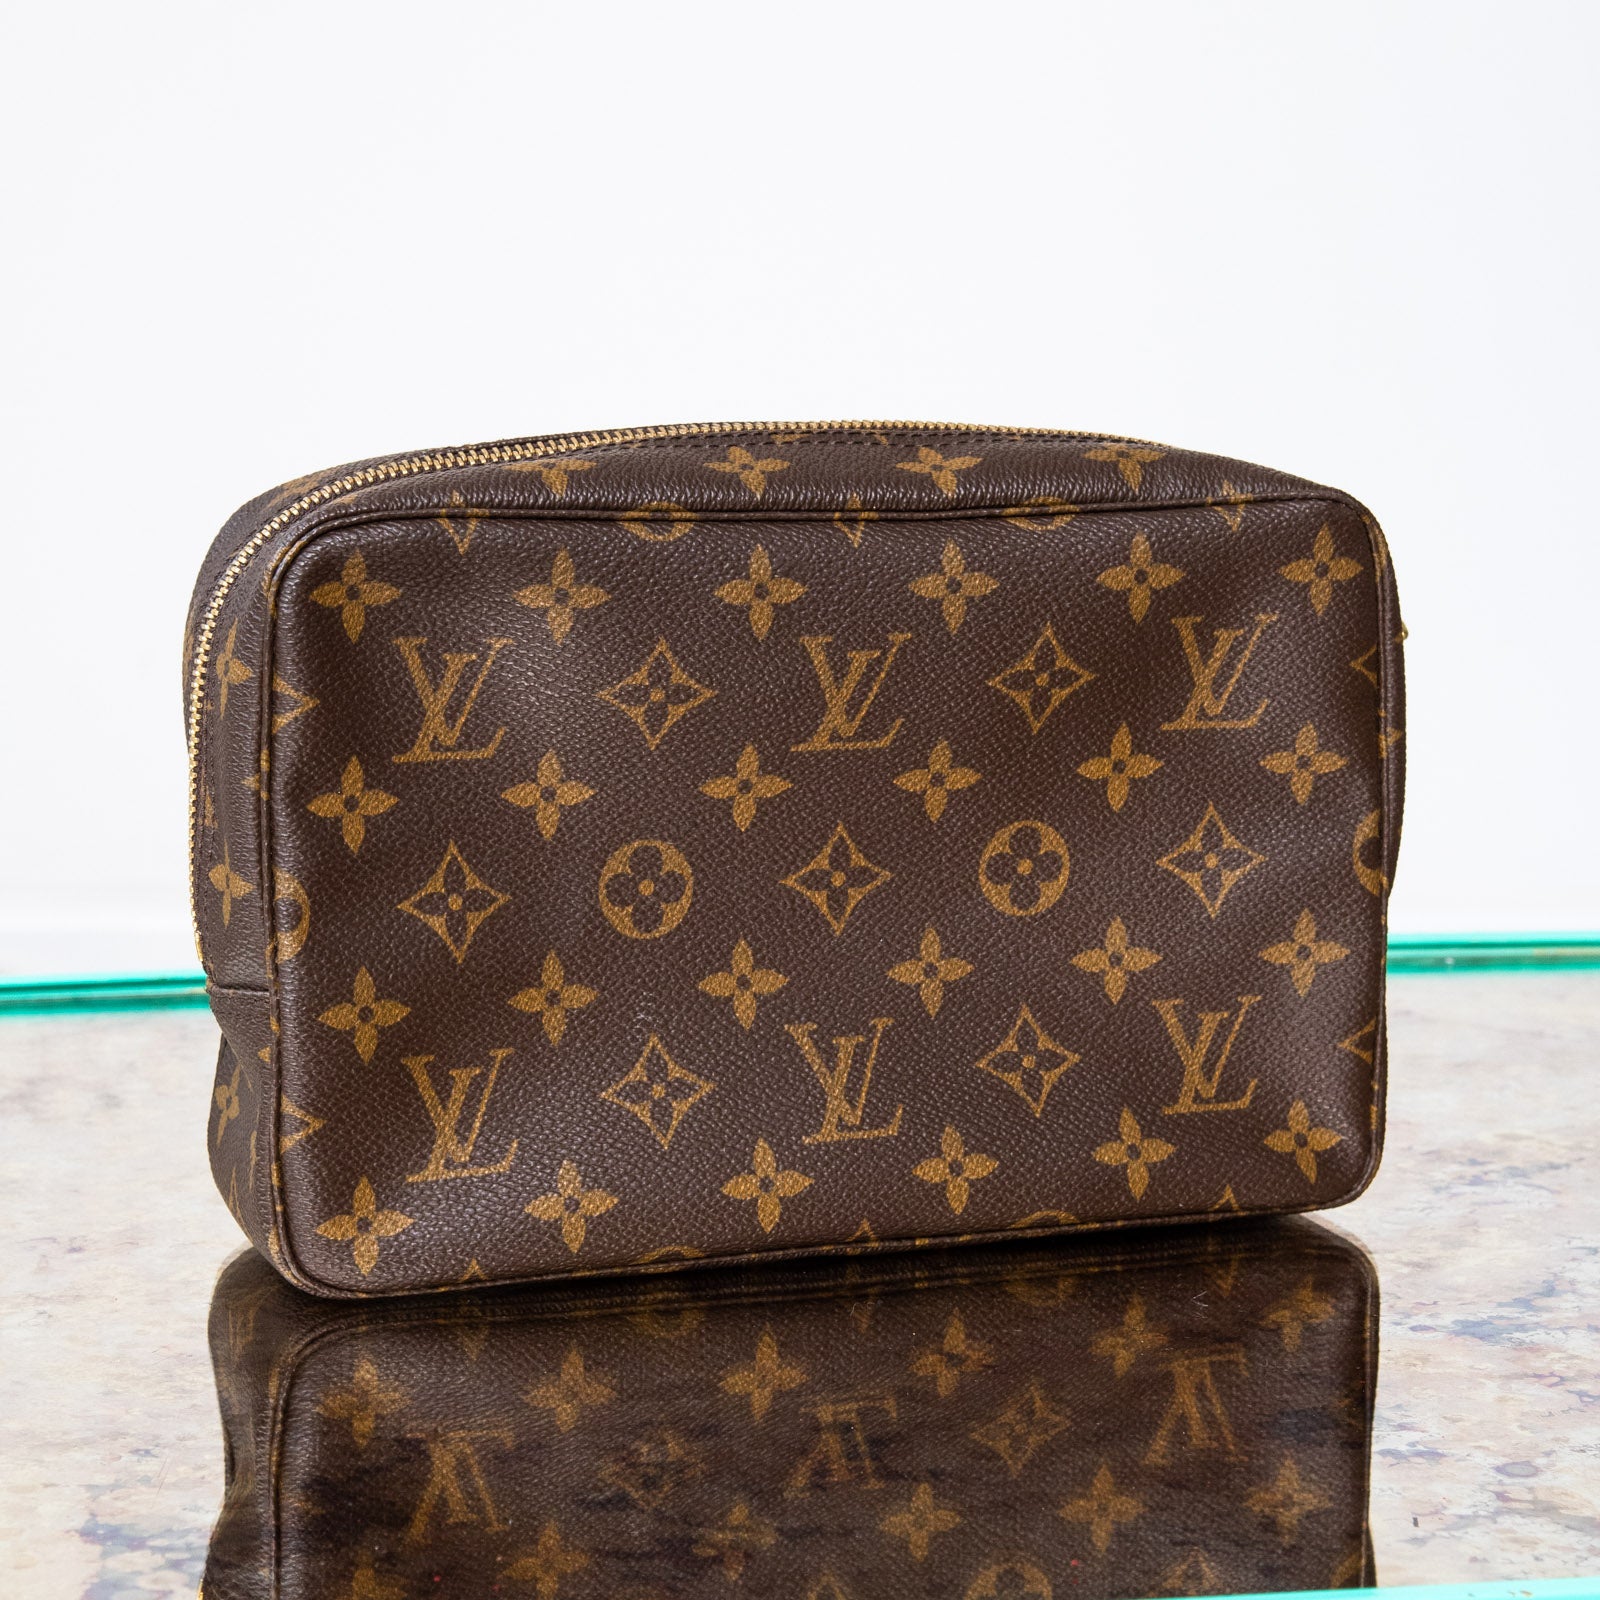 Oooo naughty little vintage Louis Vuitton orsay clutch bag unboxing 